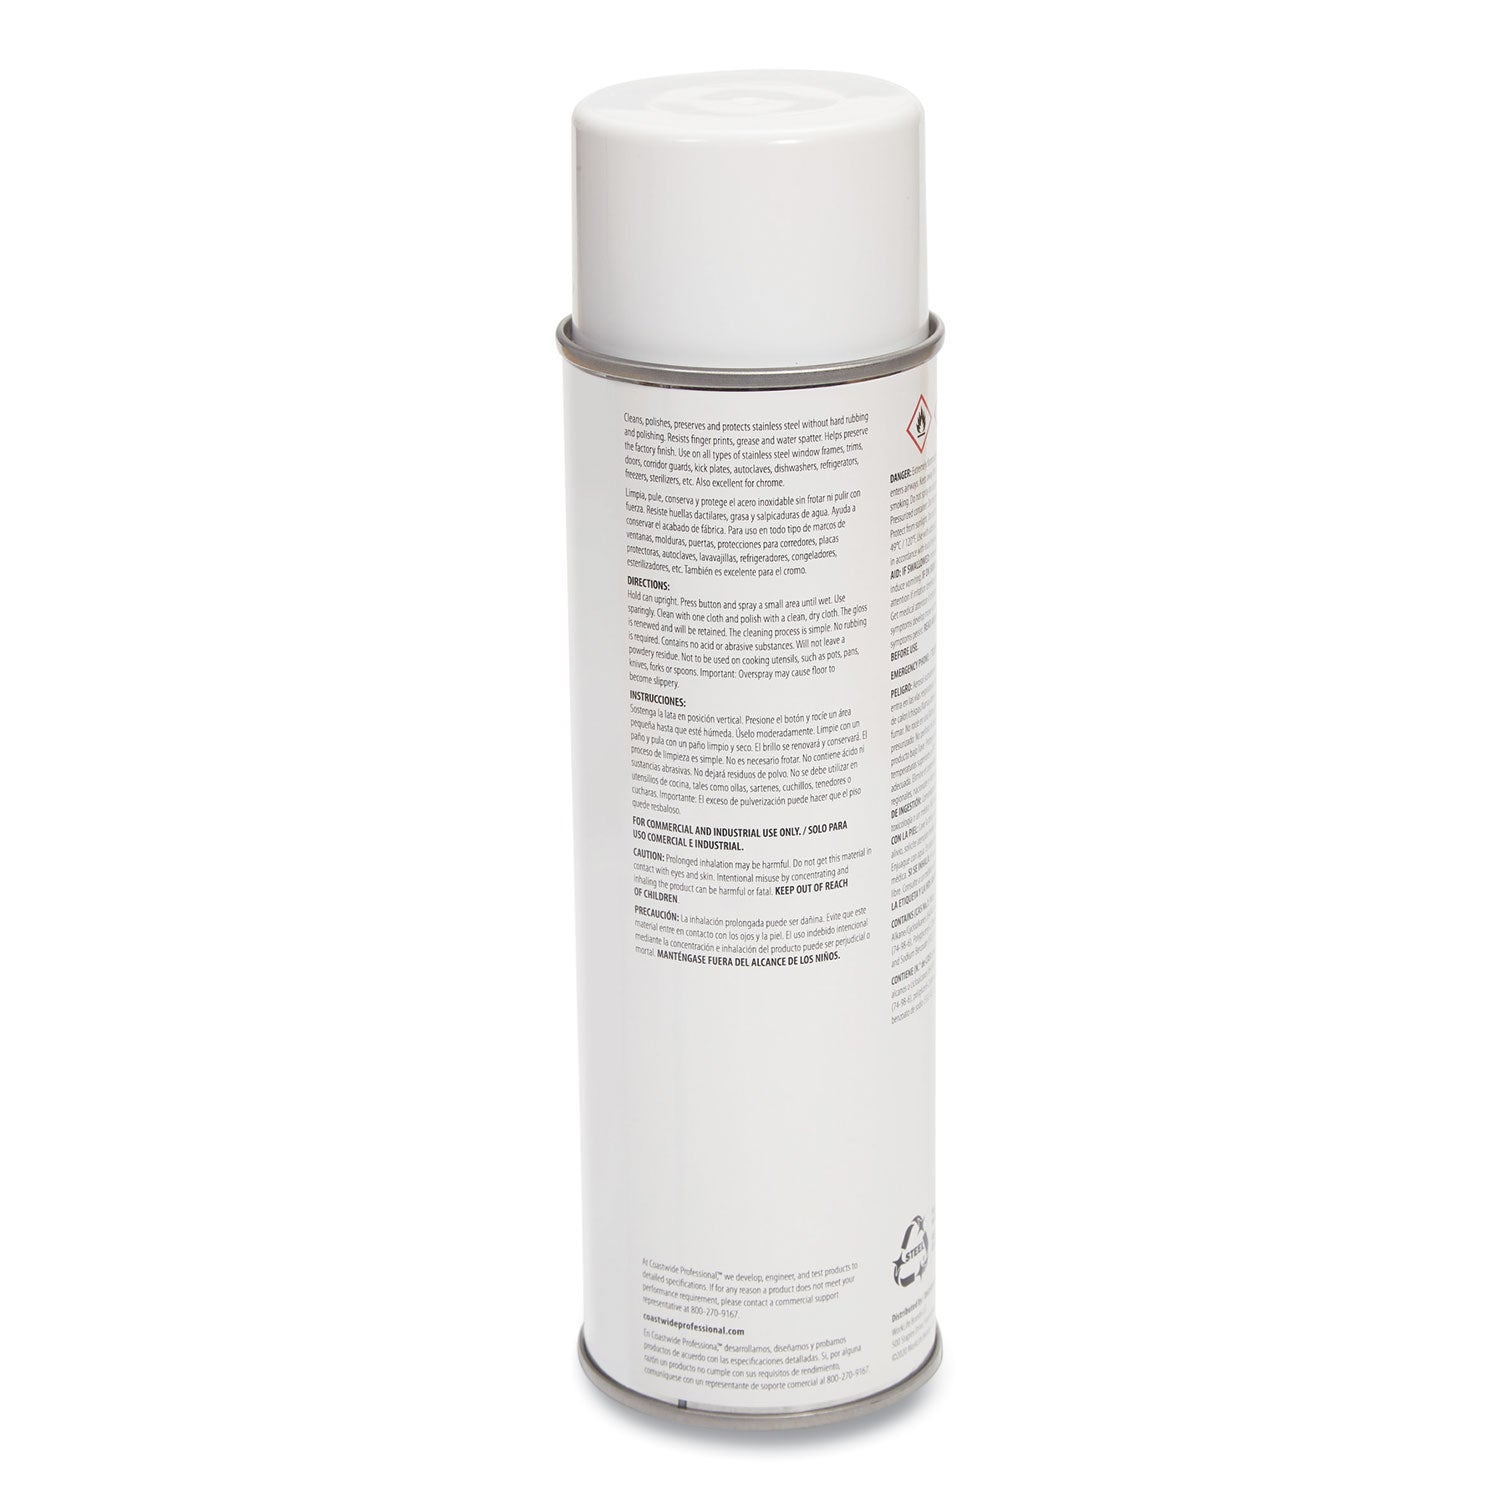 stainless-steel-cleaner-and-maintainer-fresh-and-clean-16-oz-aerosol-spray-6-carton_cwz58498a50877 - 3